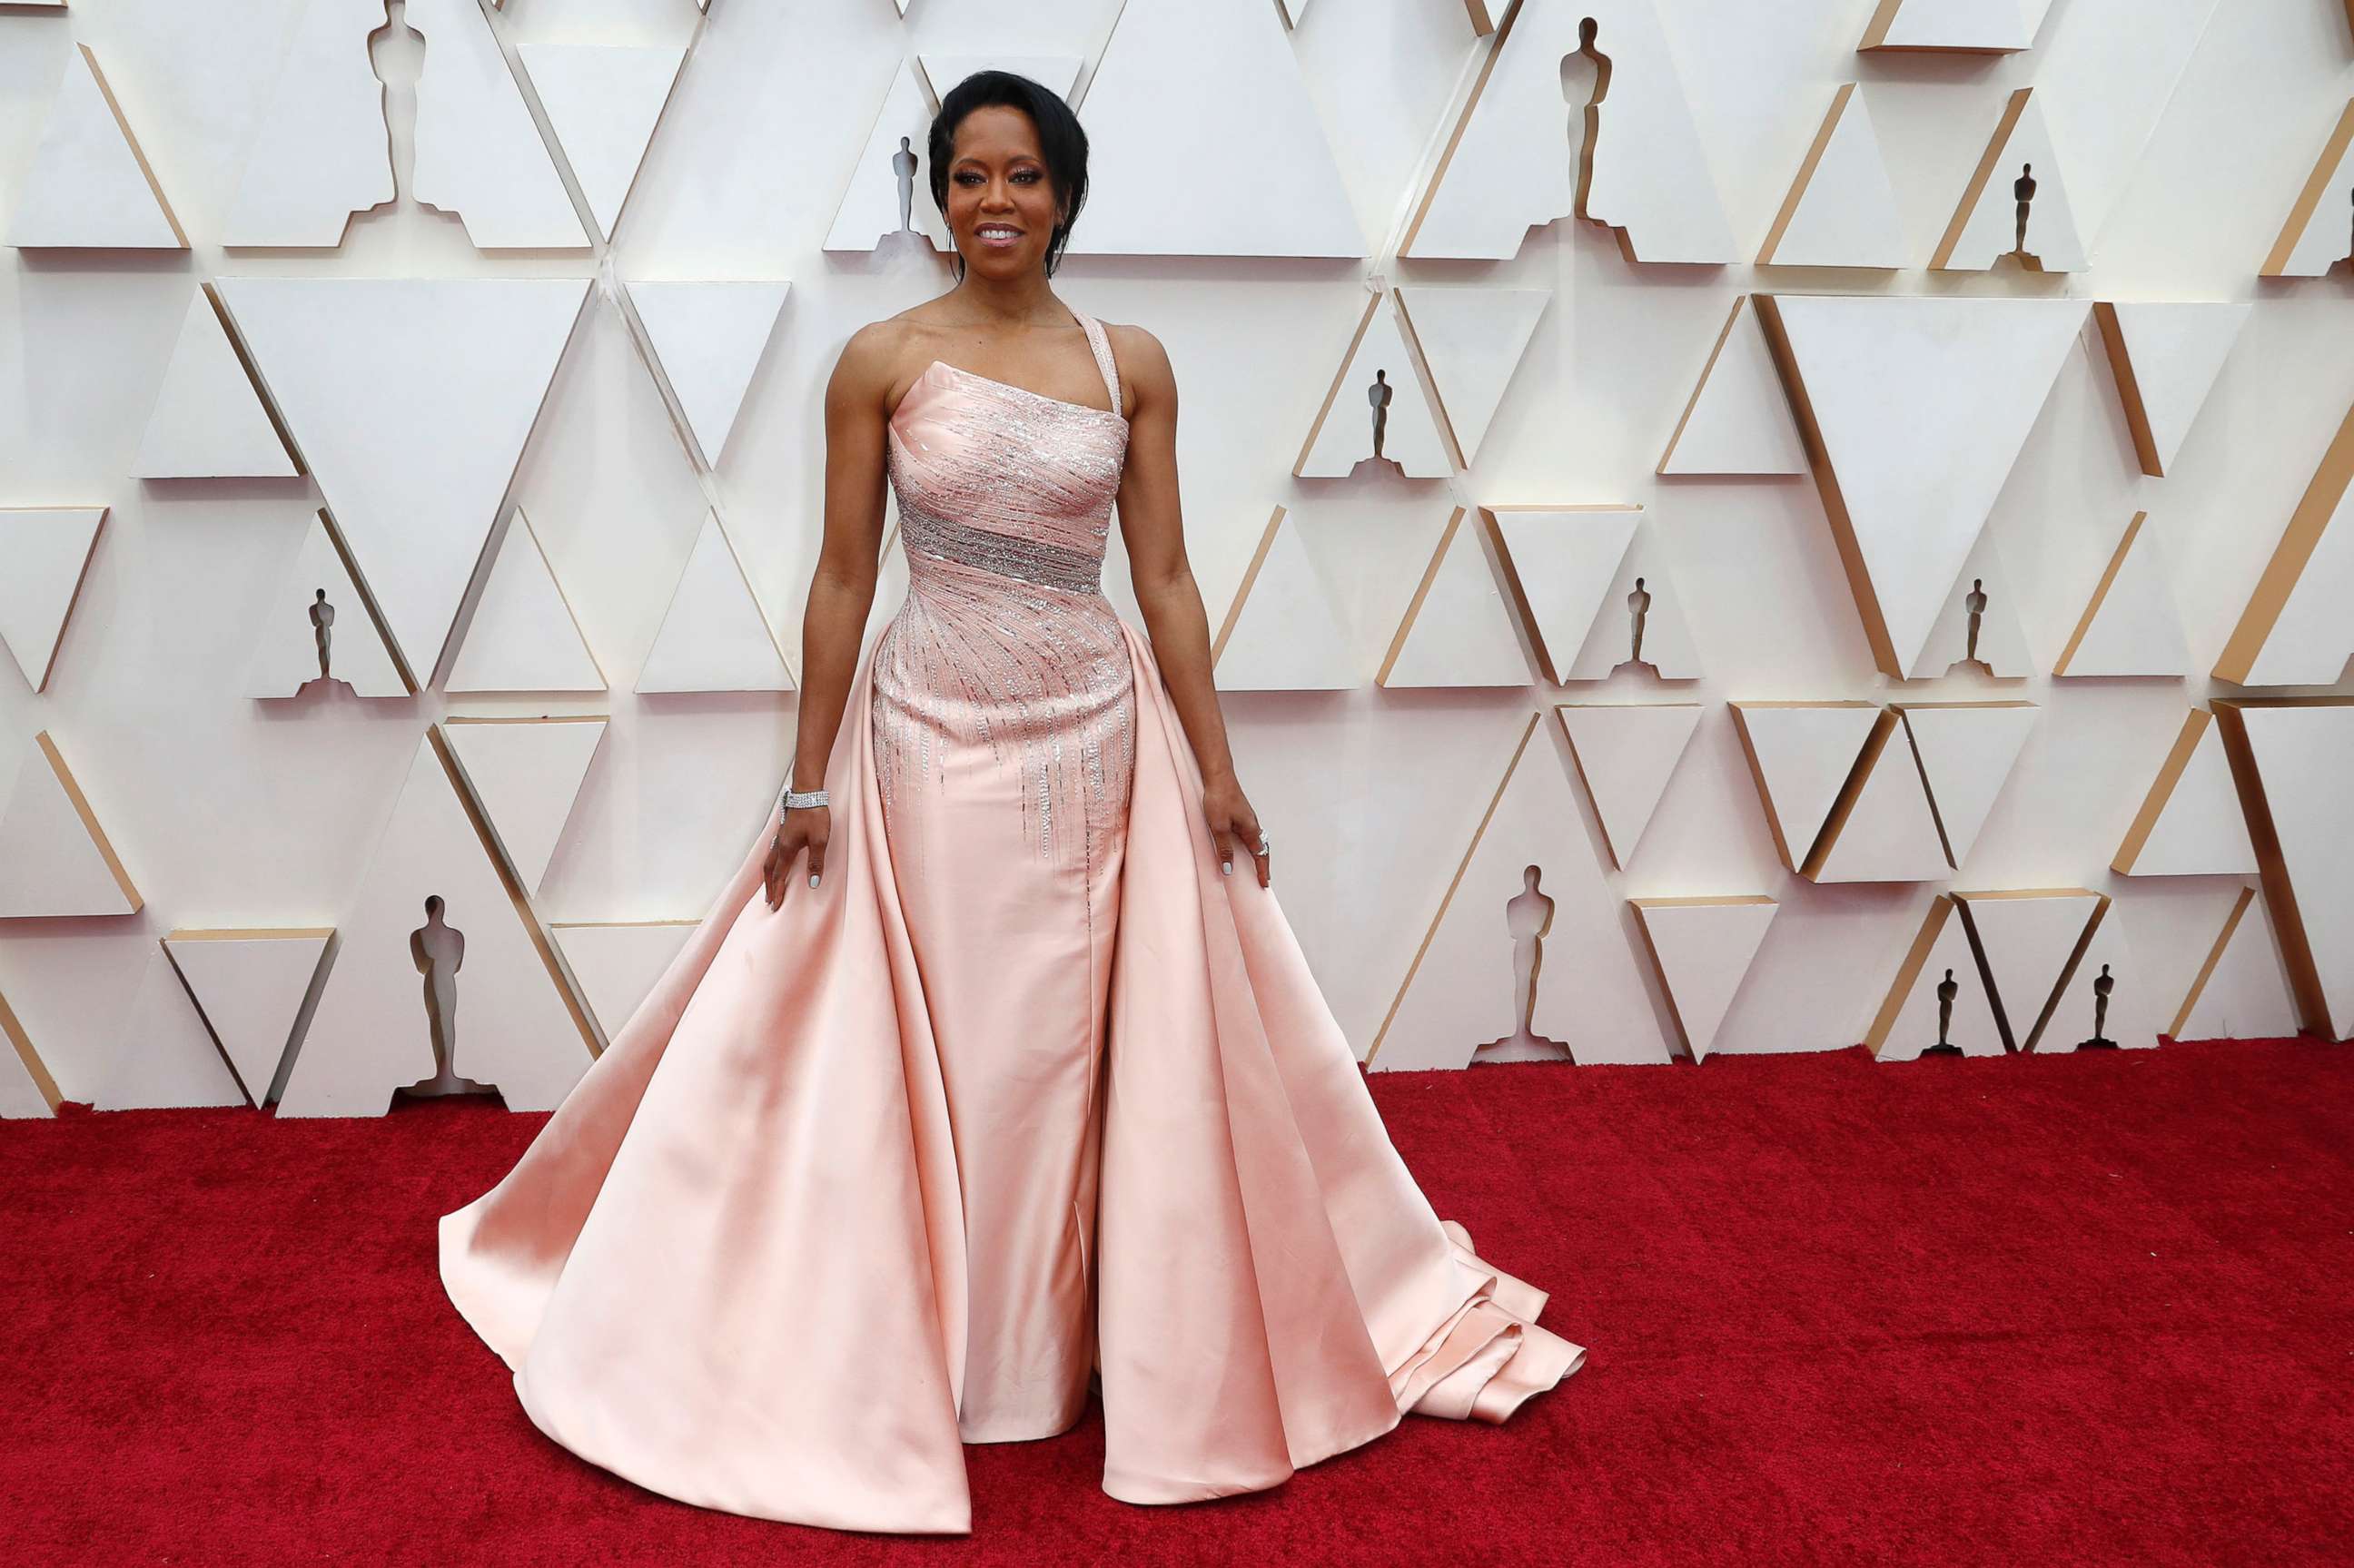 Regina King Wore a Sparkling Blue Gown to the Oscars